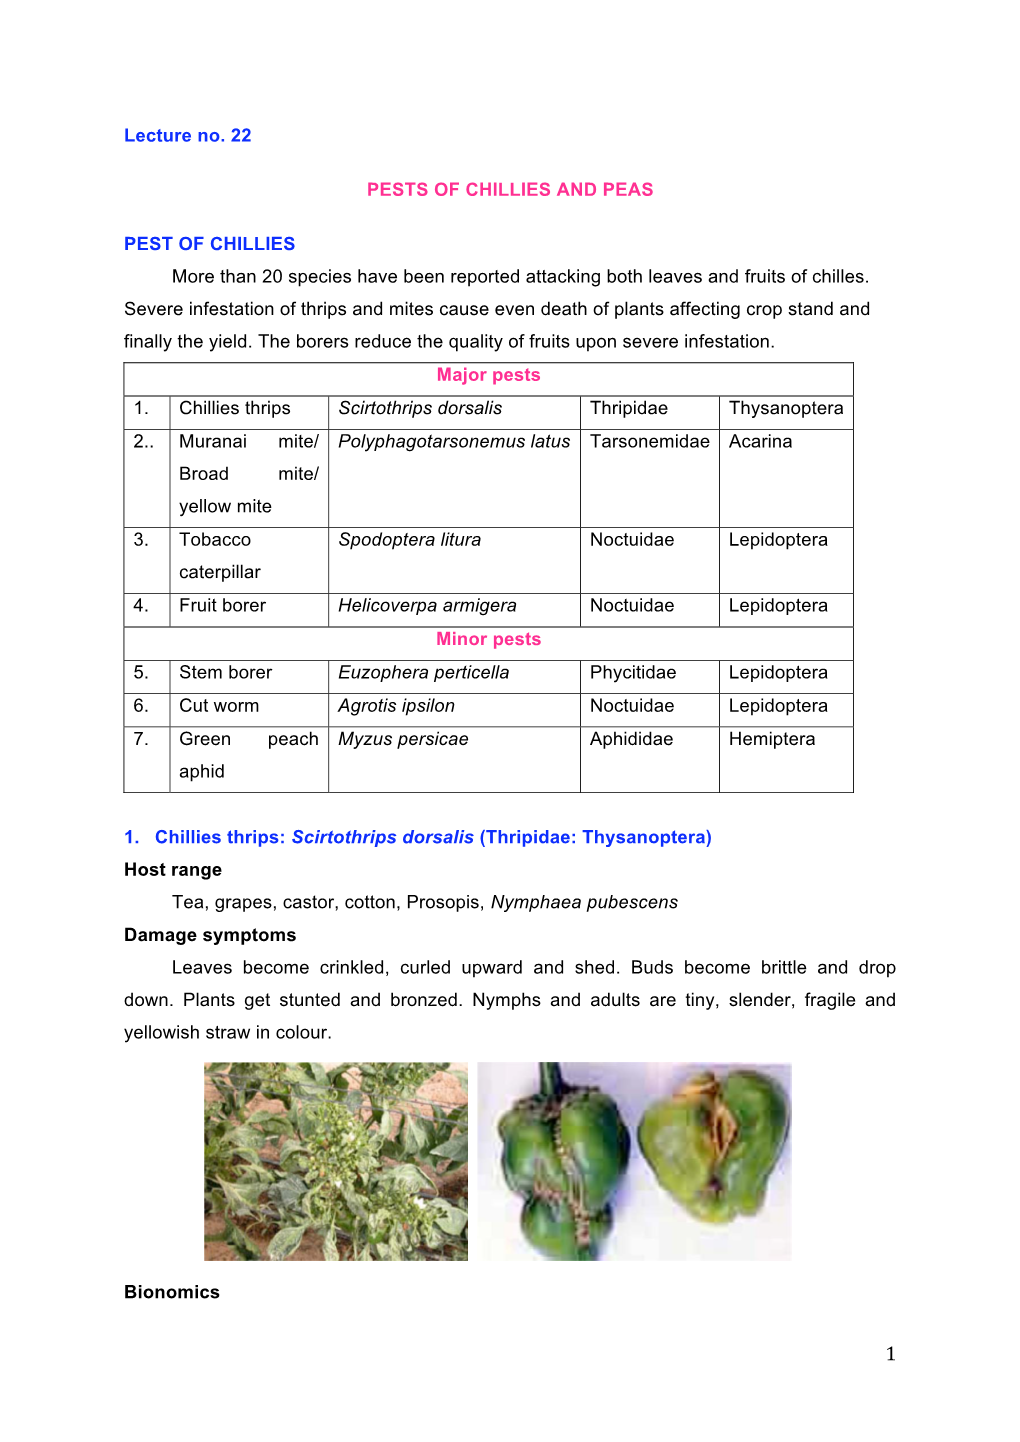 Pests of Chillies and Peas